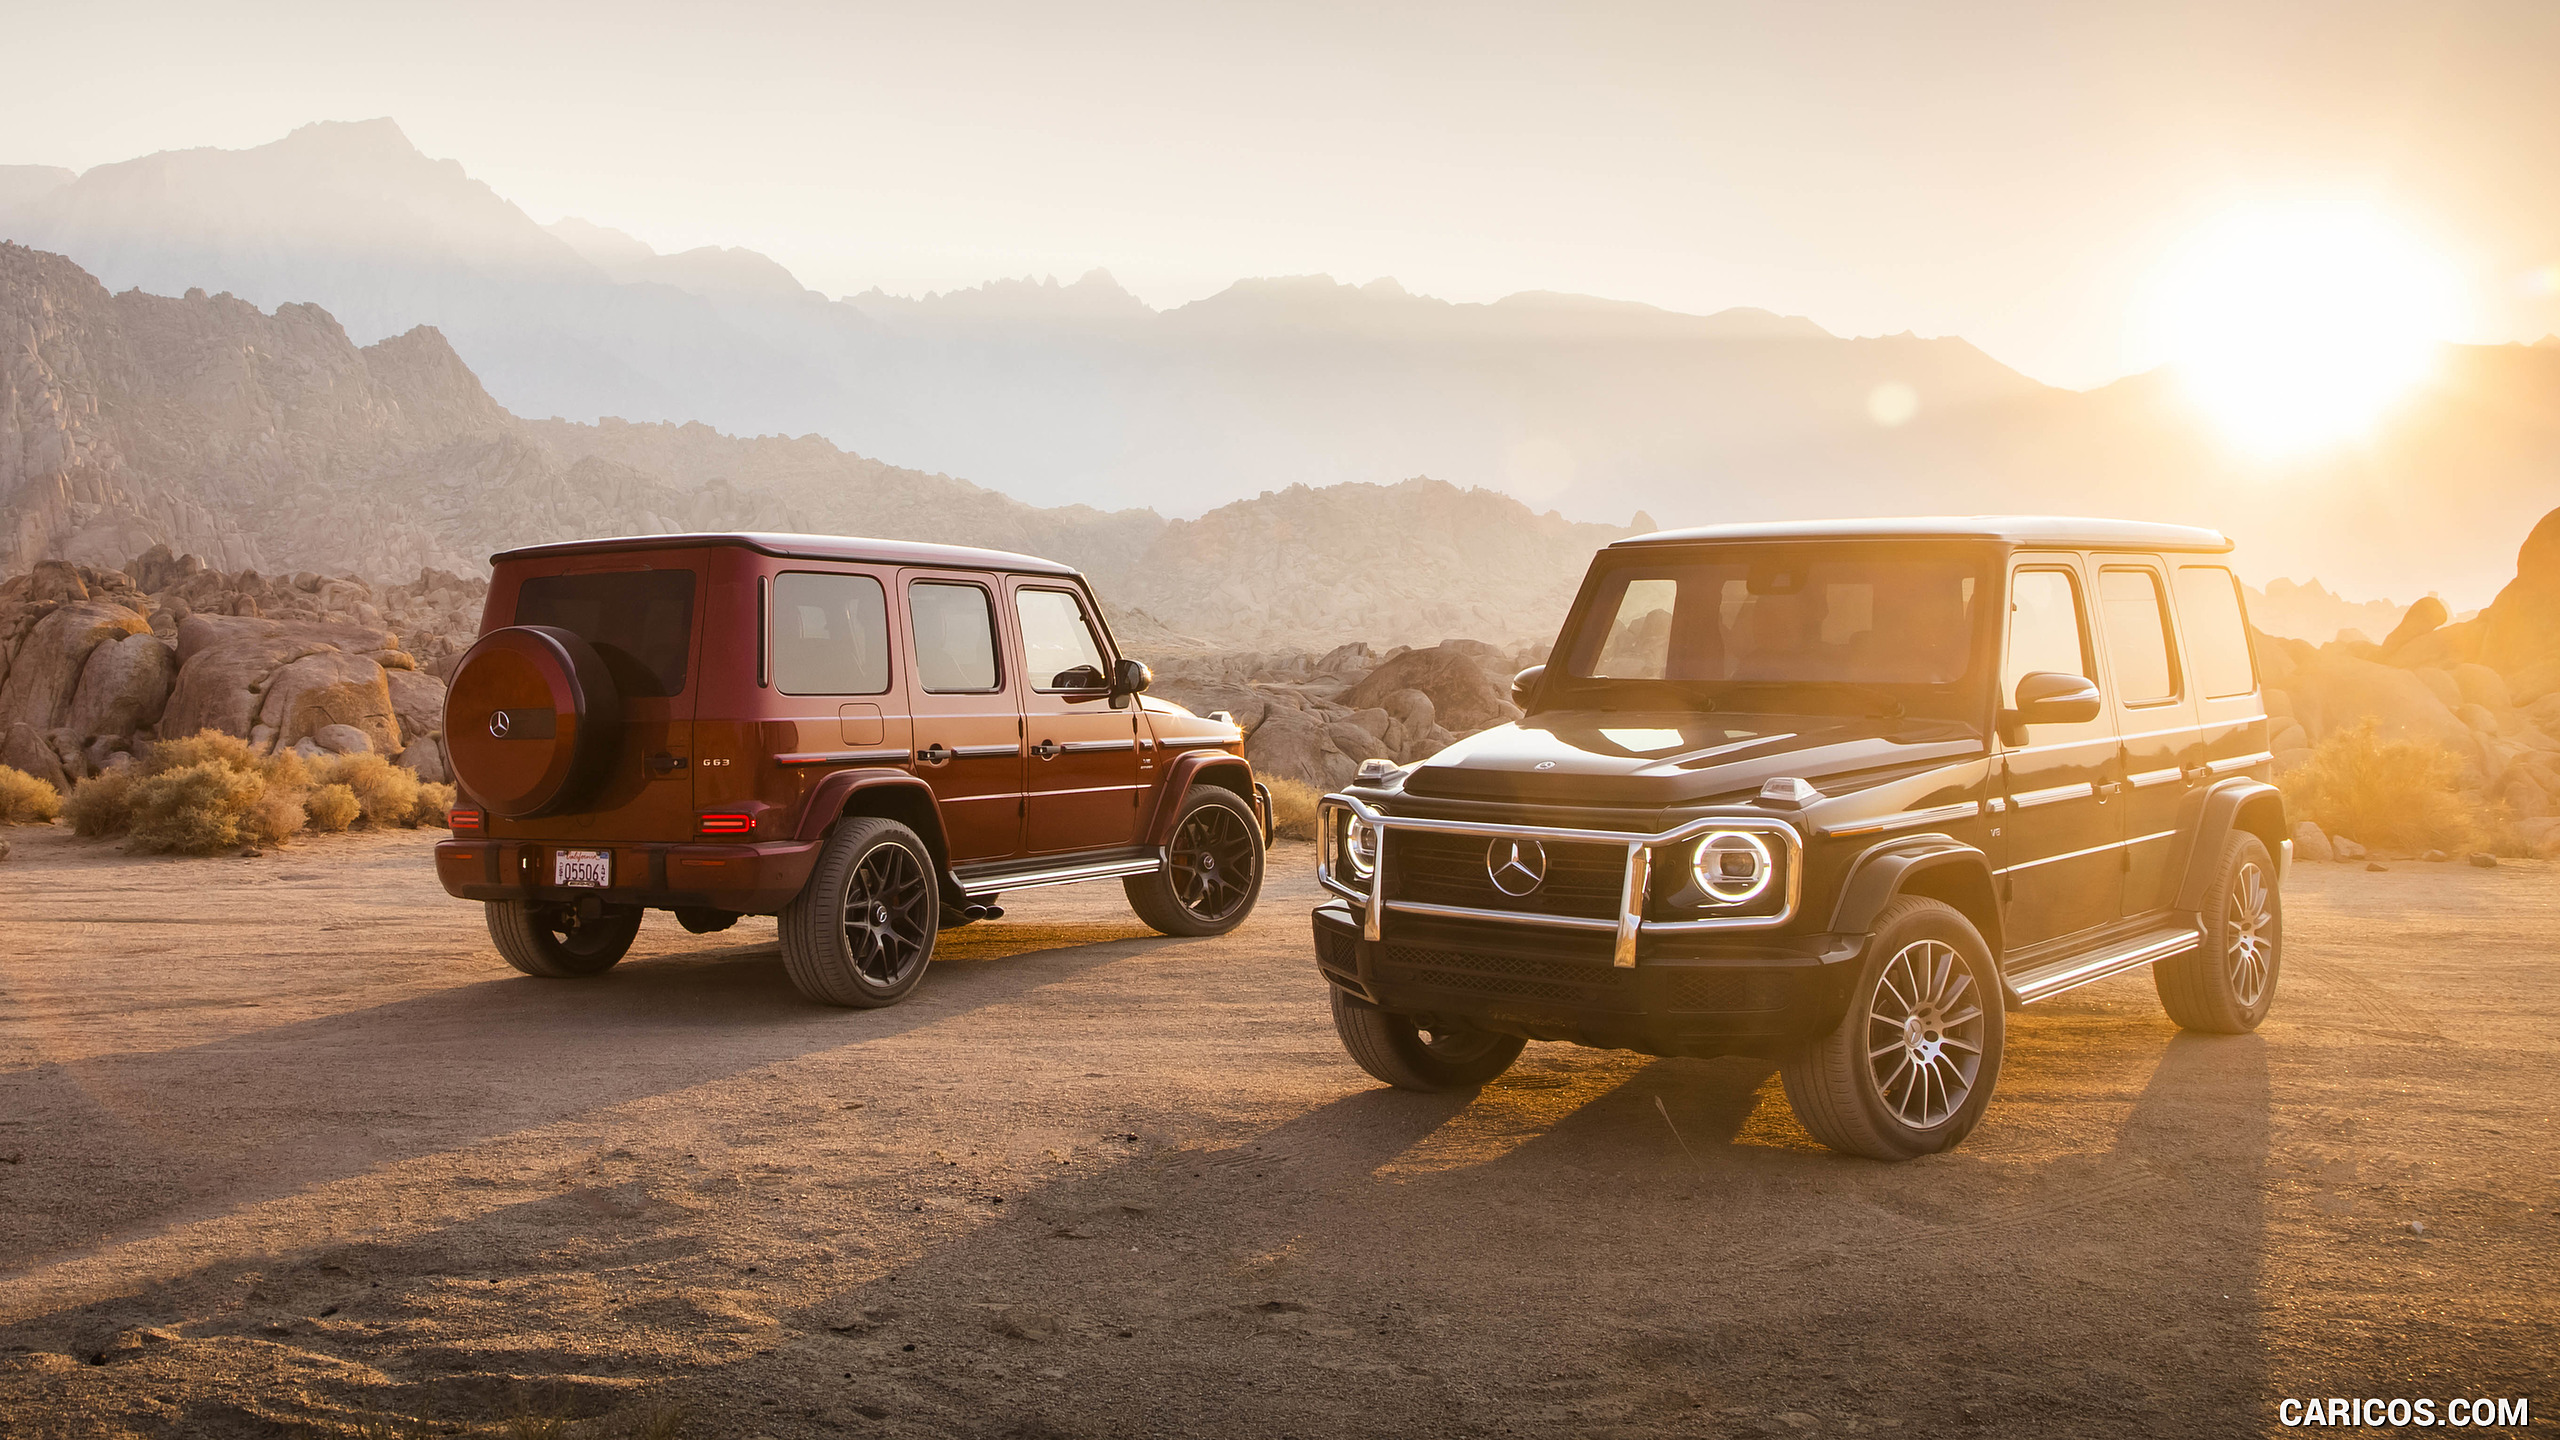 2019 Mercedes-AMG G63 (U.S.-Spec) and 2019 G550, #346 of 452